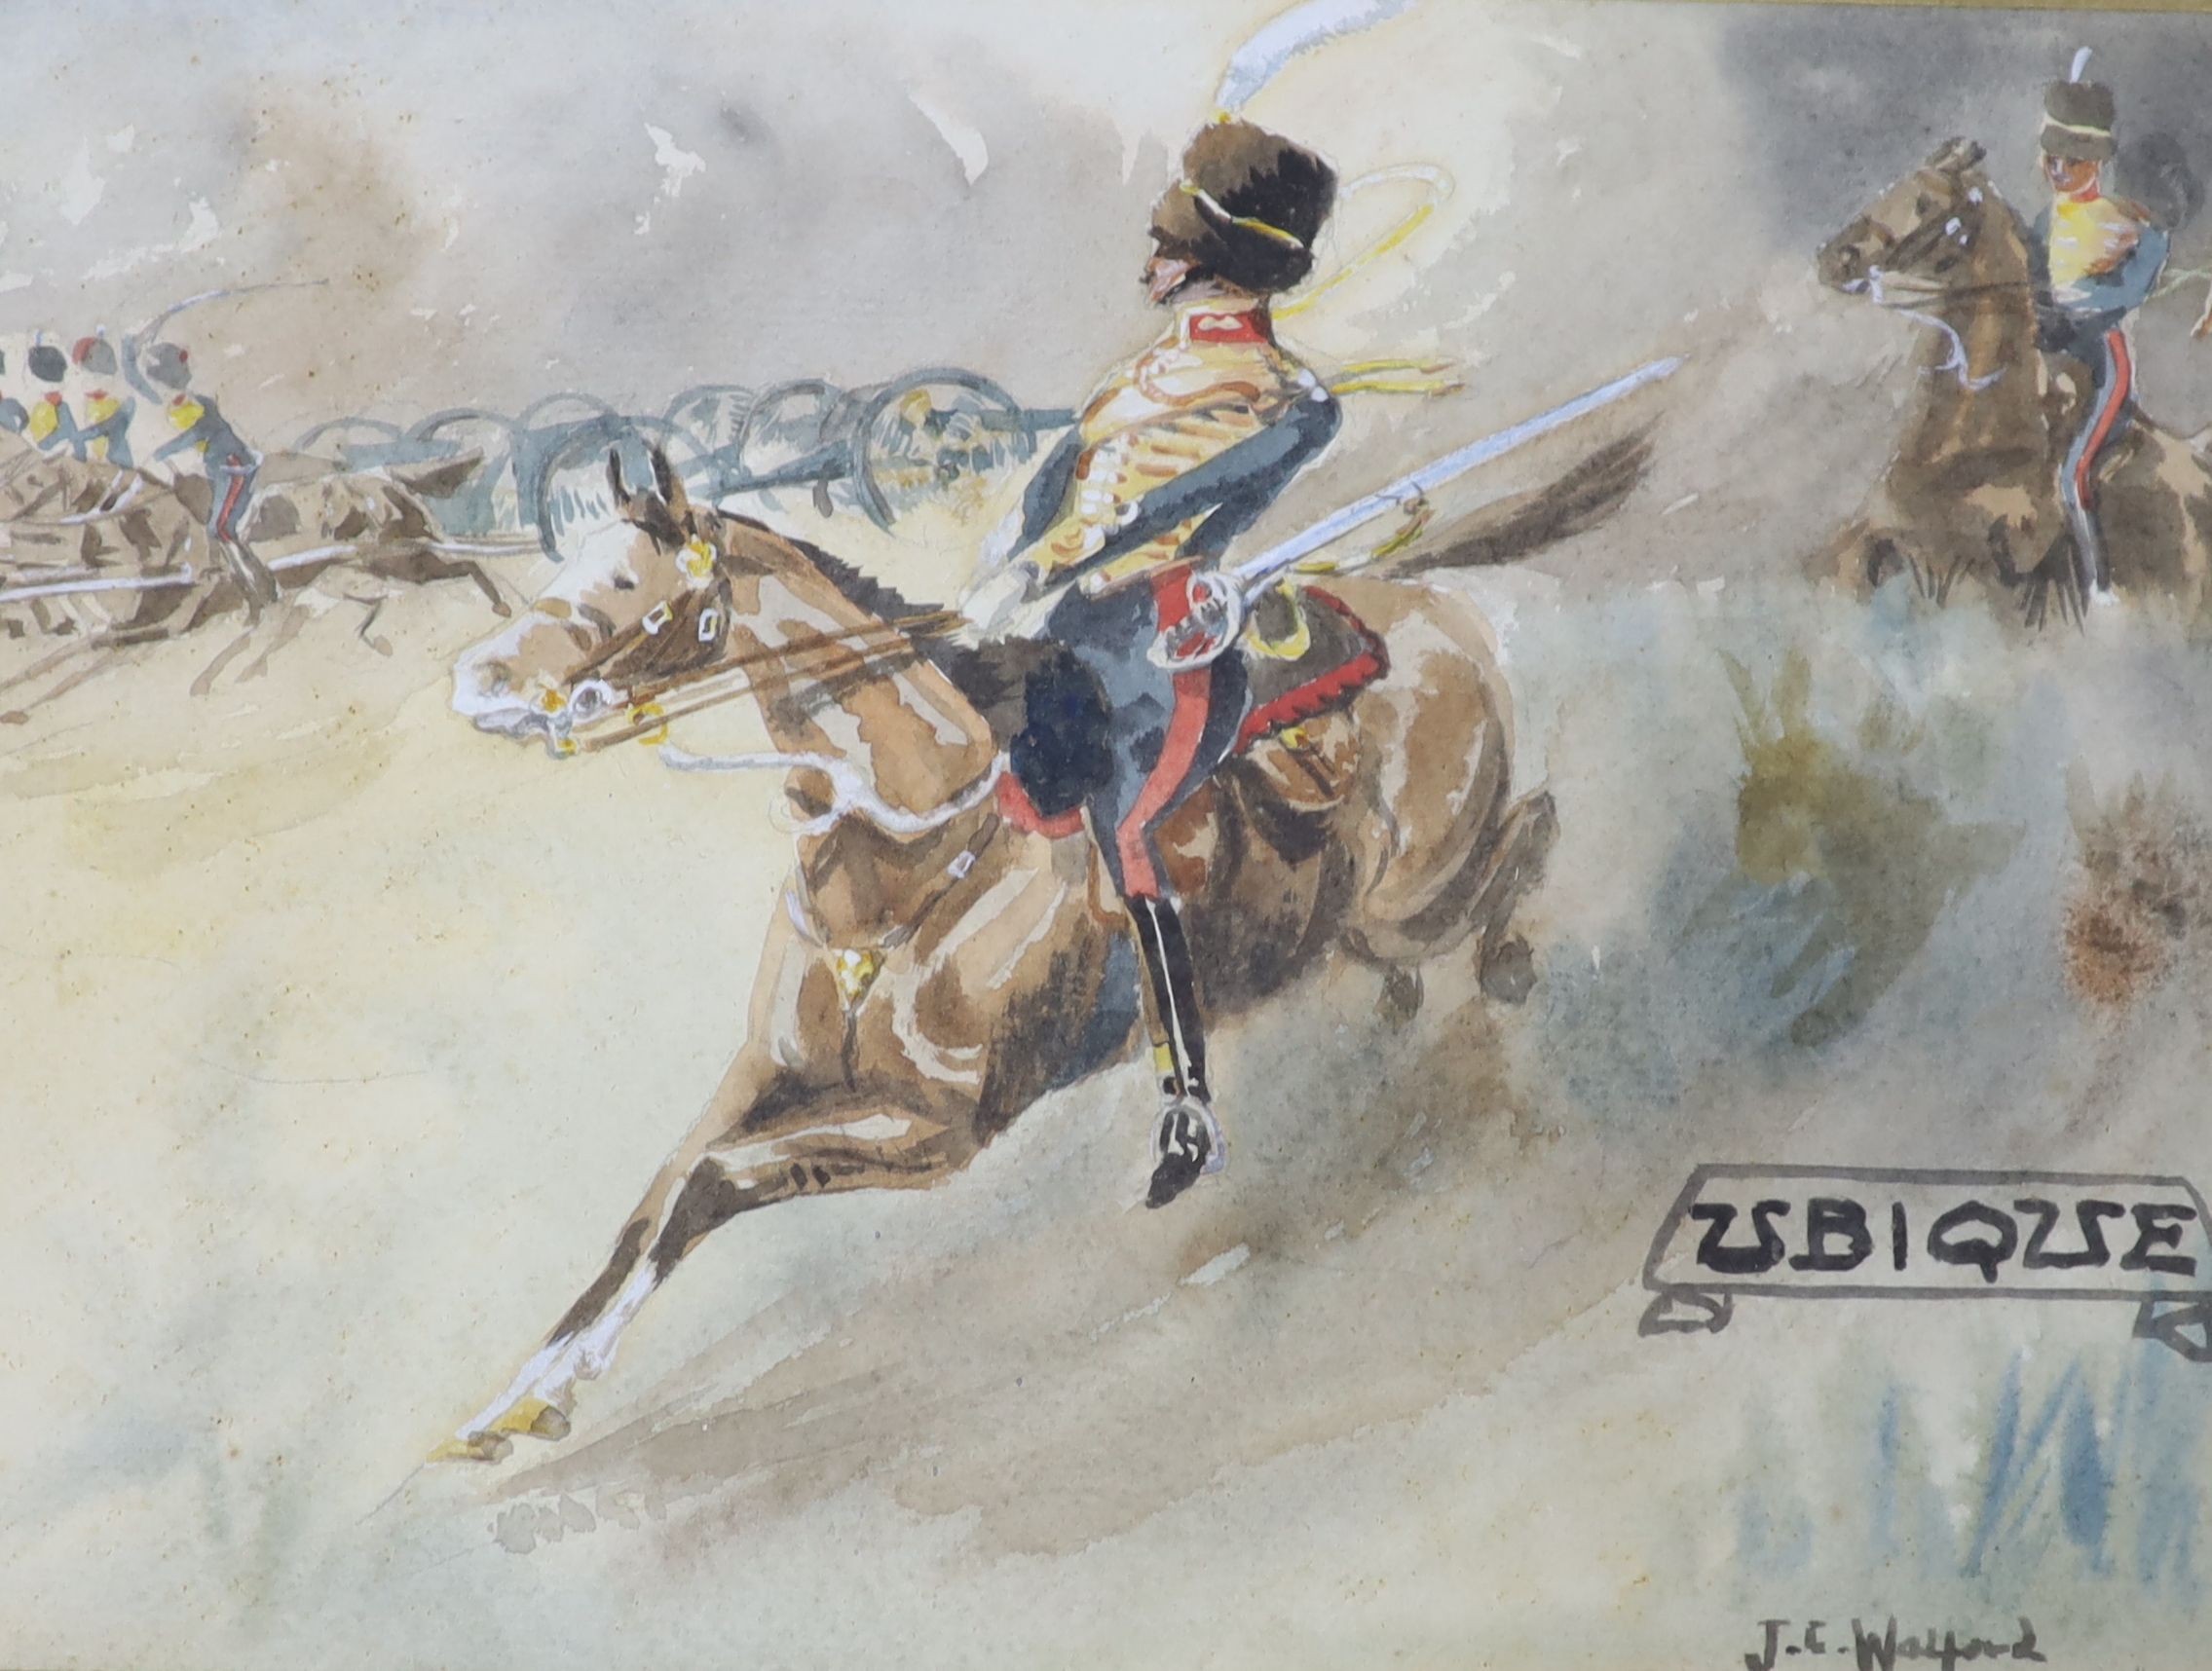 J.C. Walford, watercolour, 'Ubique', Cavalrymen charging, signed and dated '06, 18 x 25cm